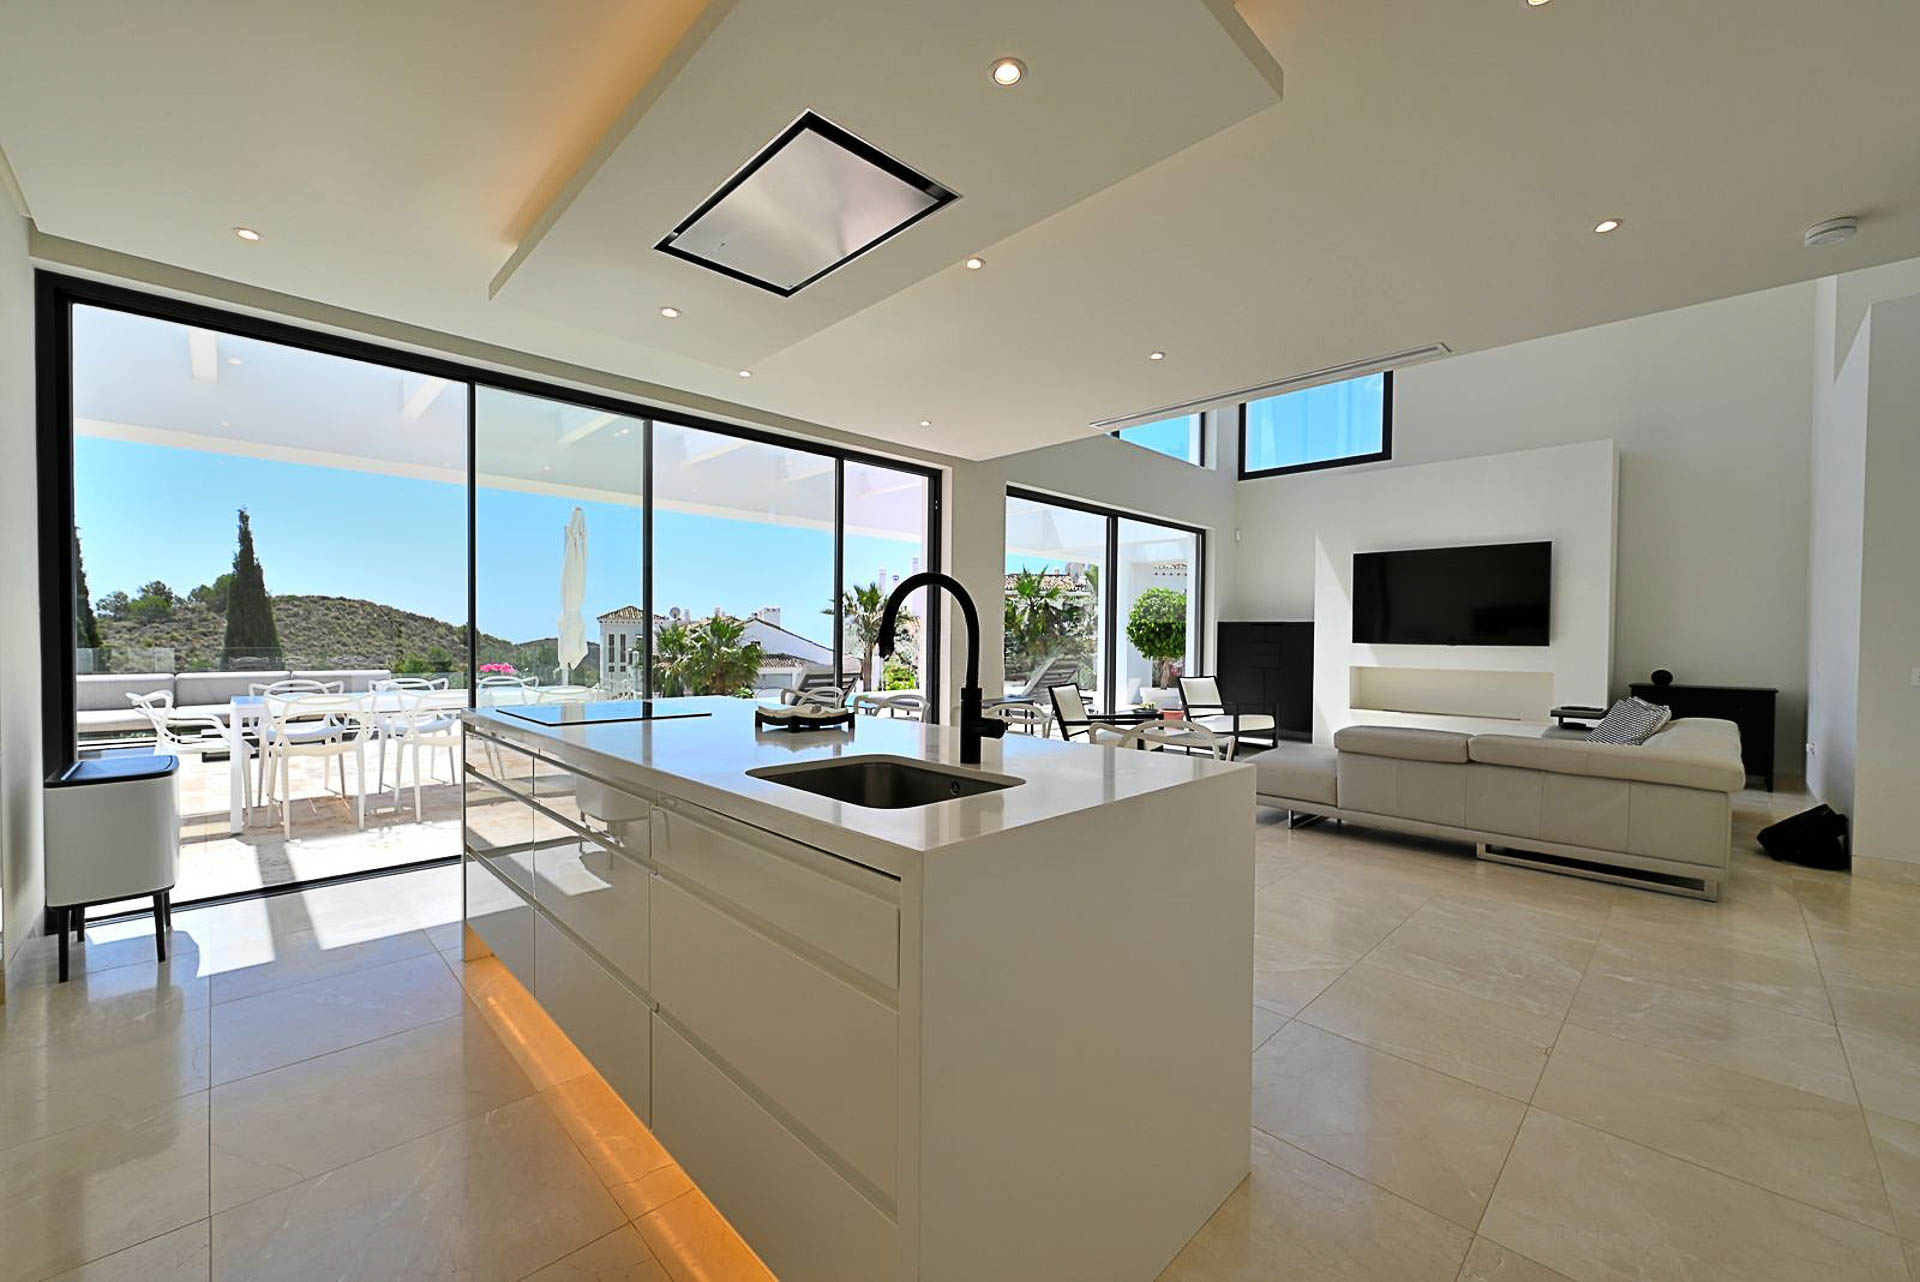 Recently built villa with amazing views on the Mijas Road